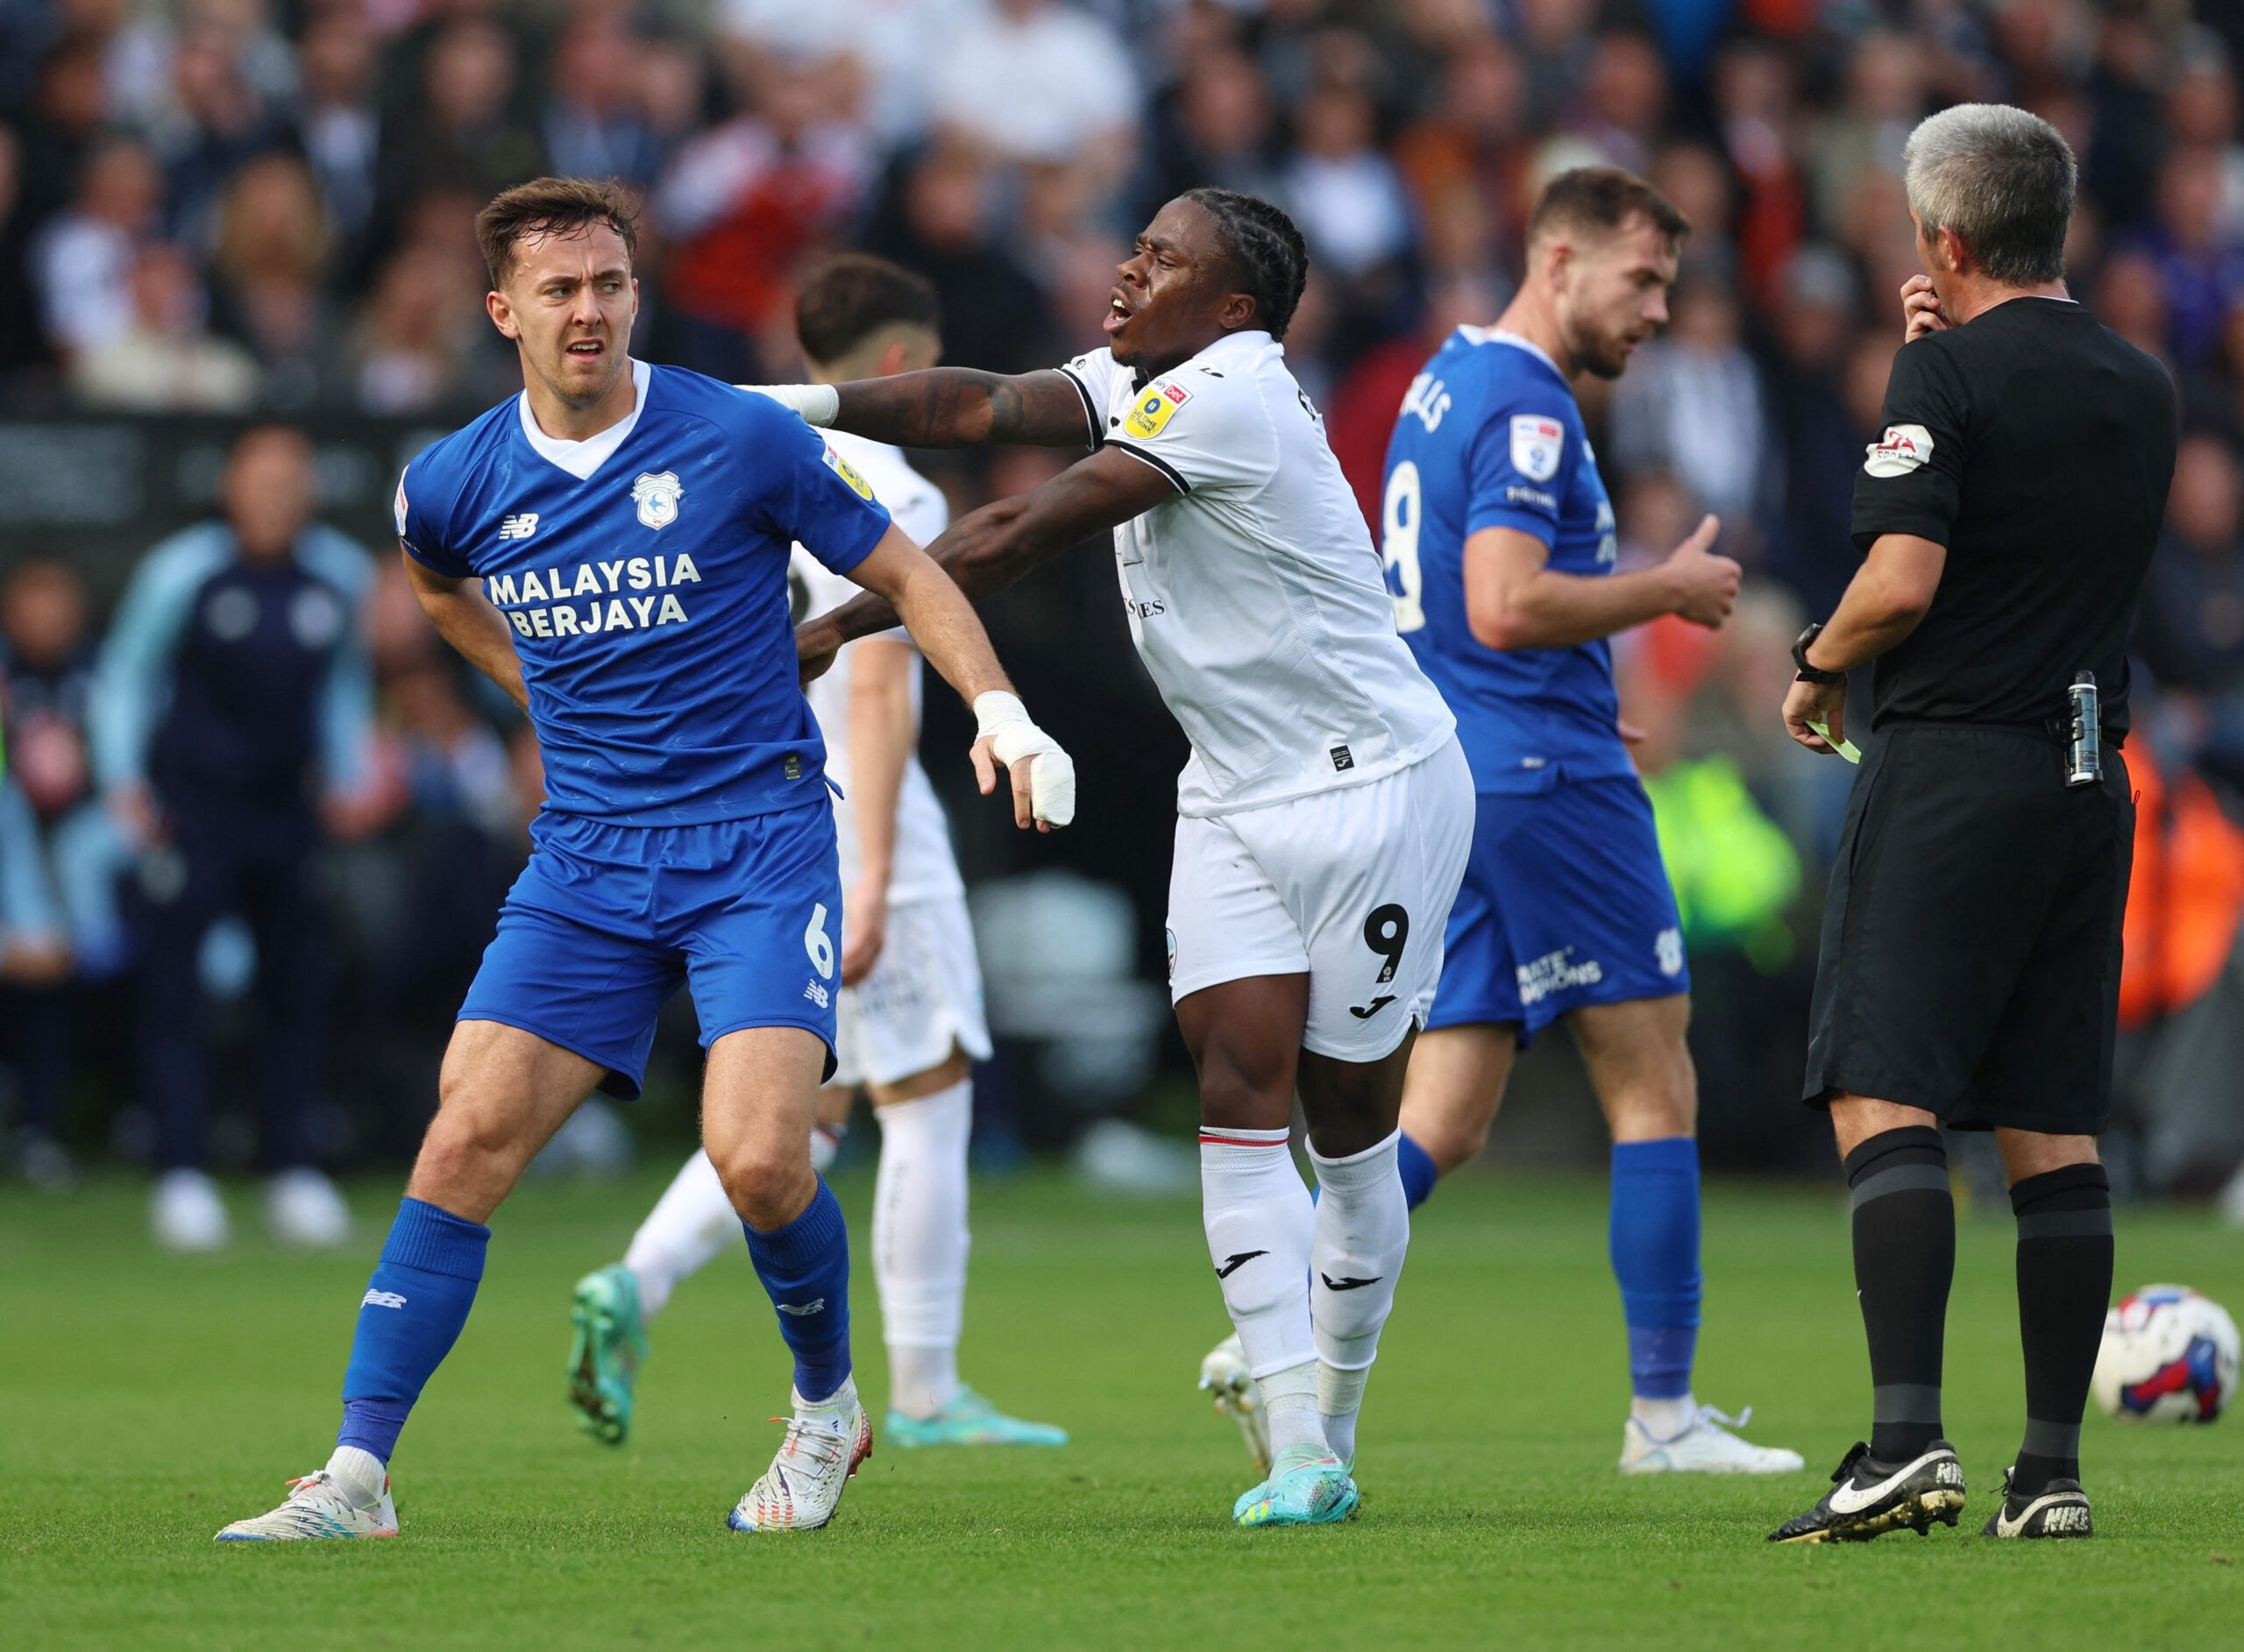 Soccer Football - Championship - Swansea City v Cardiff City - Swansea.com Stadium, Swansea, Britain - October 23, 2022 Swansea City's Michael Obafemi clashes with Cardiff City's Ryan Wintle Action Images/Matthew Childs EDITORIAL USE ONLY. No use with unauthorized audio, video, data, fixture lists, club/league logos or 'live' services. Online in-match use limited to 75 images, no video emulation. No use in betting, games or single club /league/player publications.  Please contact your account re